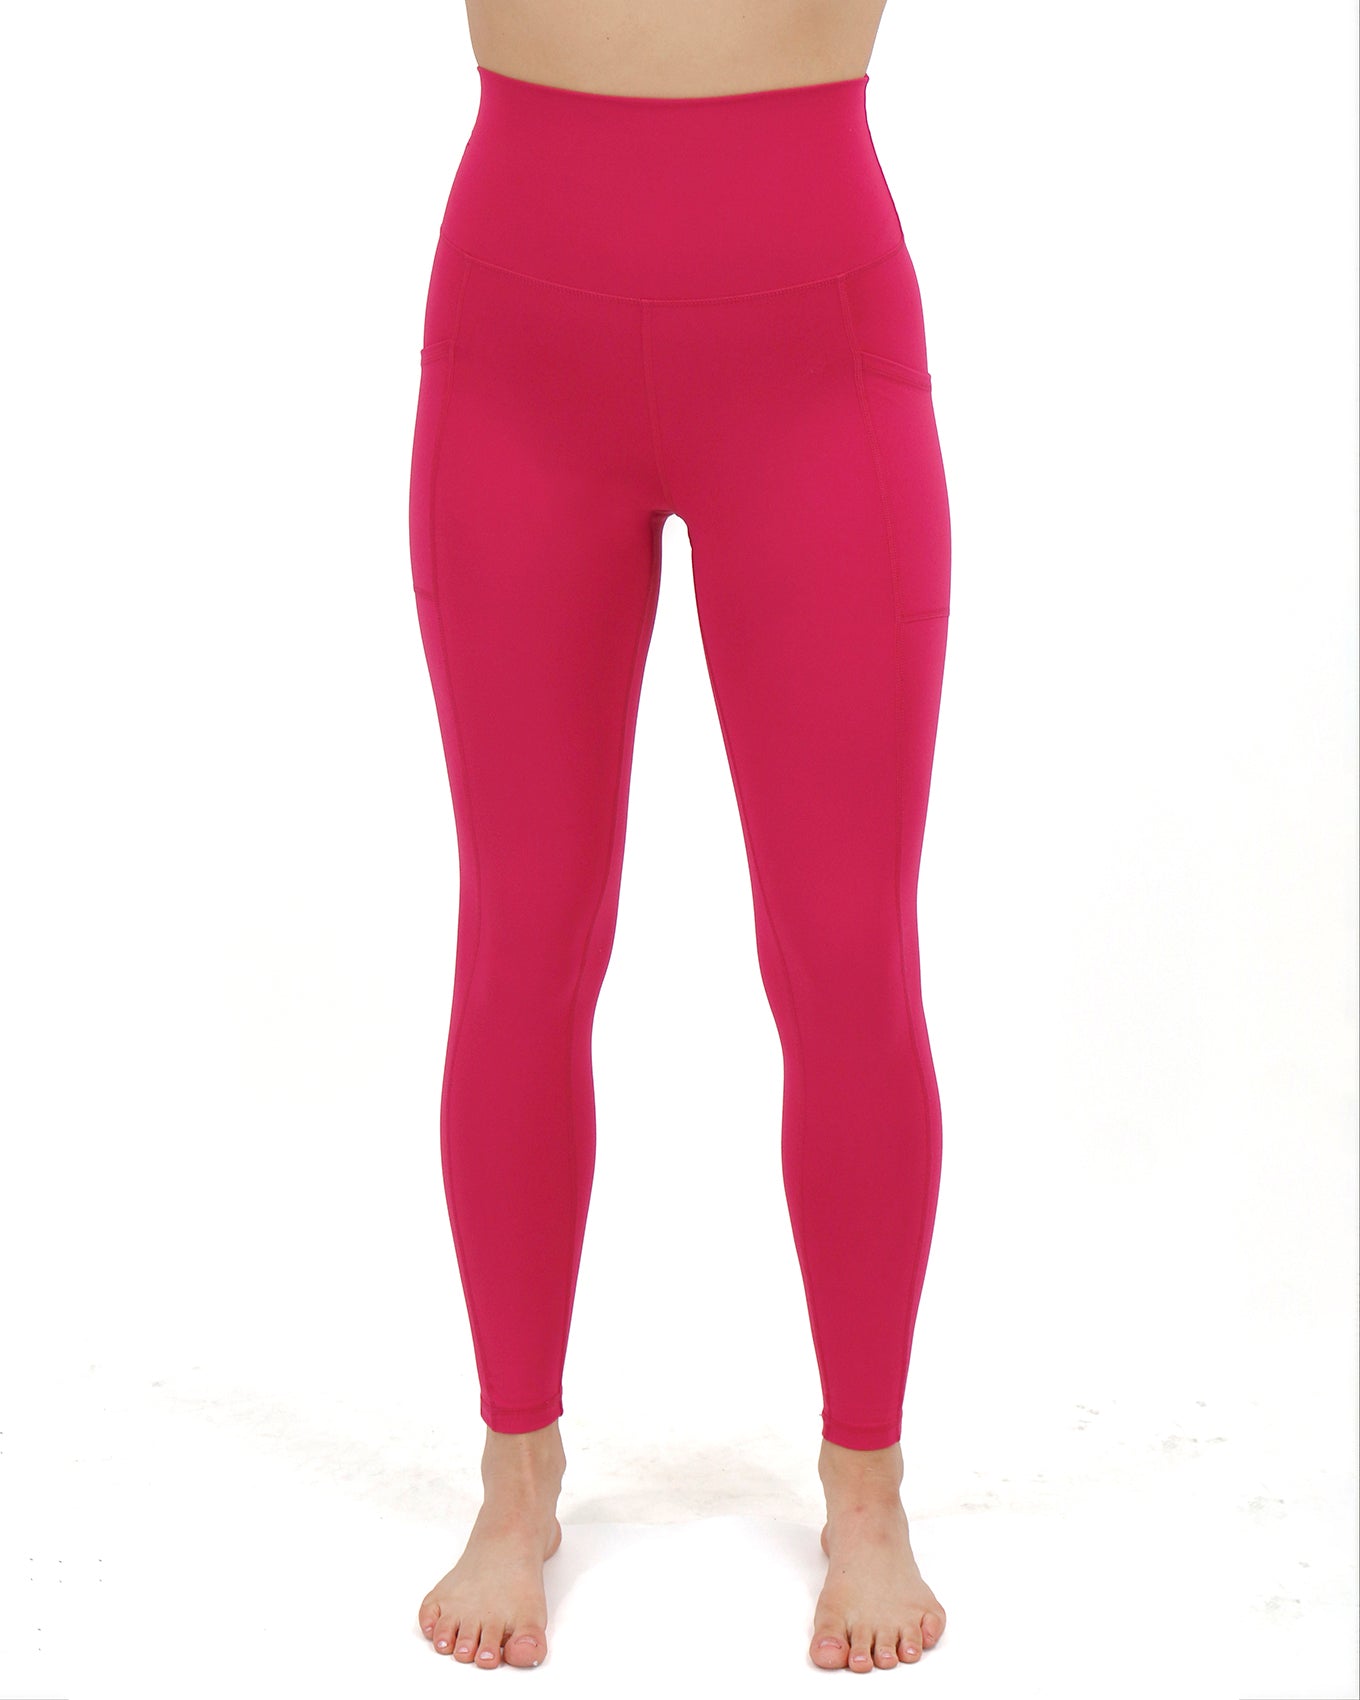 90 Degree By Reflex, Pants & Jumpsuits, Soft Pink 9 Degree Leggings Size  Small New